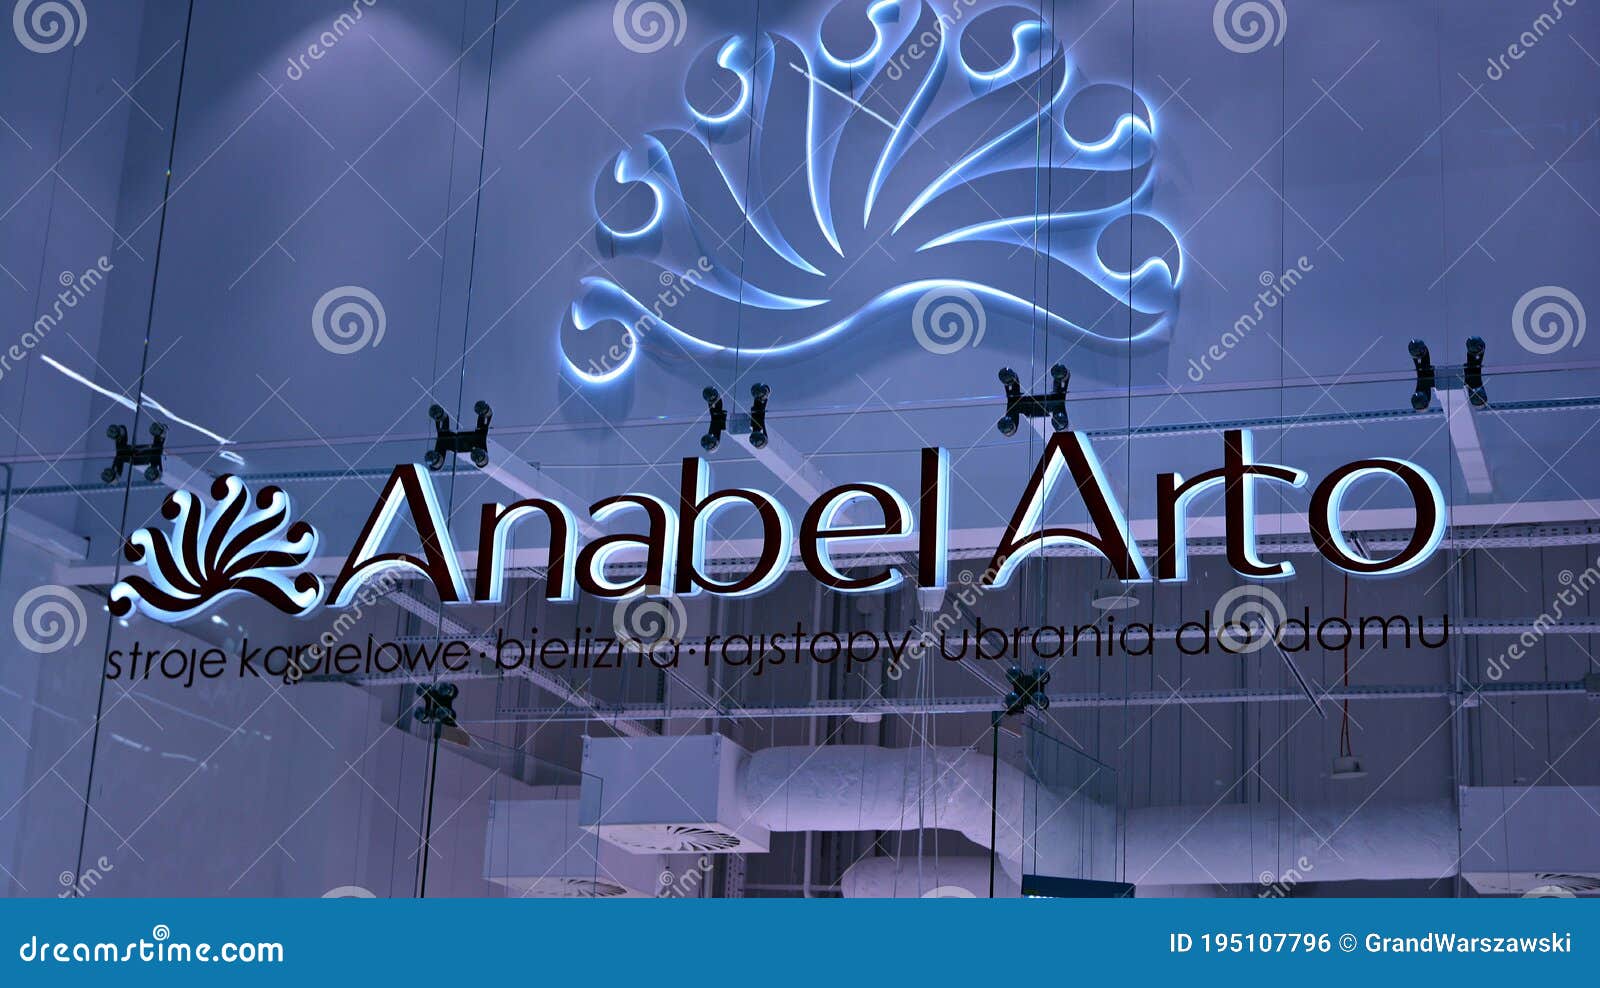 https://thumbs.dreamstime.com/z/warsaw-poland-september-sign-anabel-arto-company-signboard-anabel-arto-sign-anabel-arto-company-signboard-anabel-arto-195107796.jpg